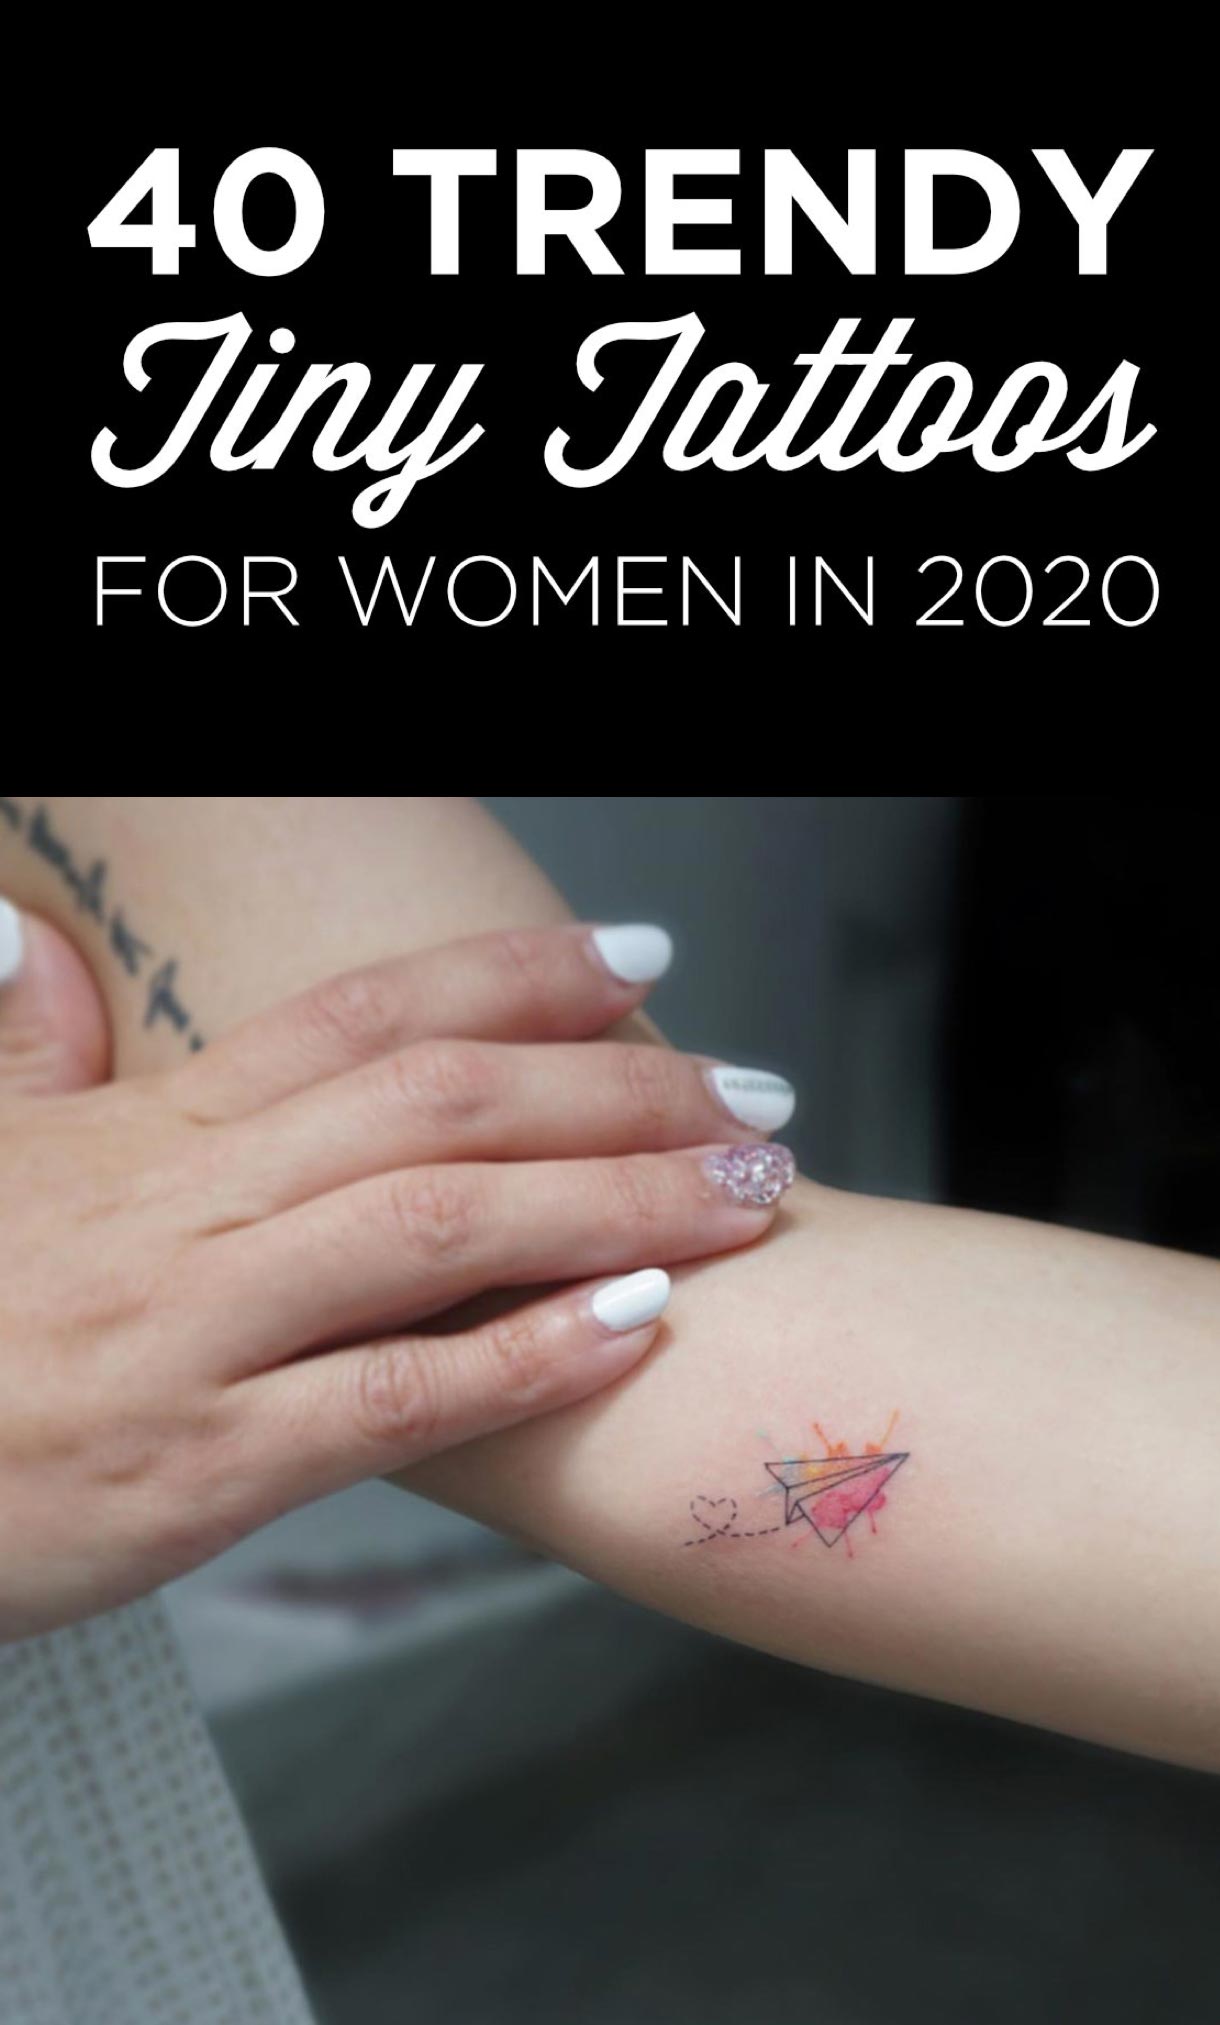 Tiny Trendy Tattoos for Women in 2020